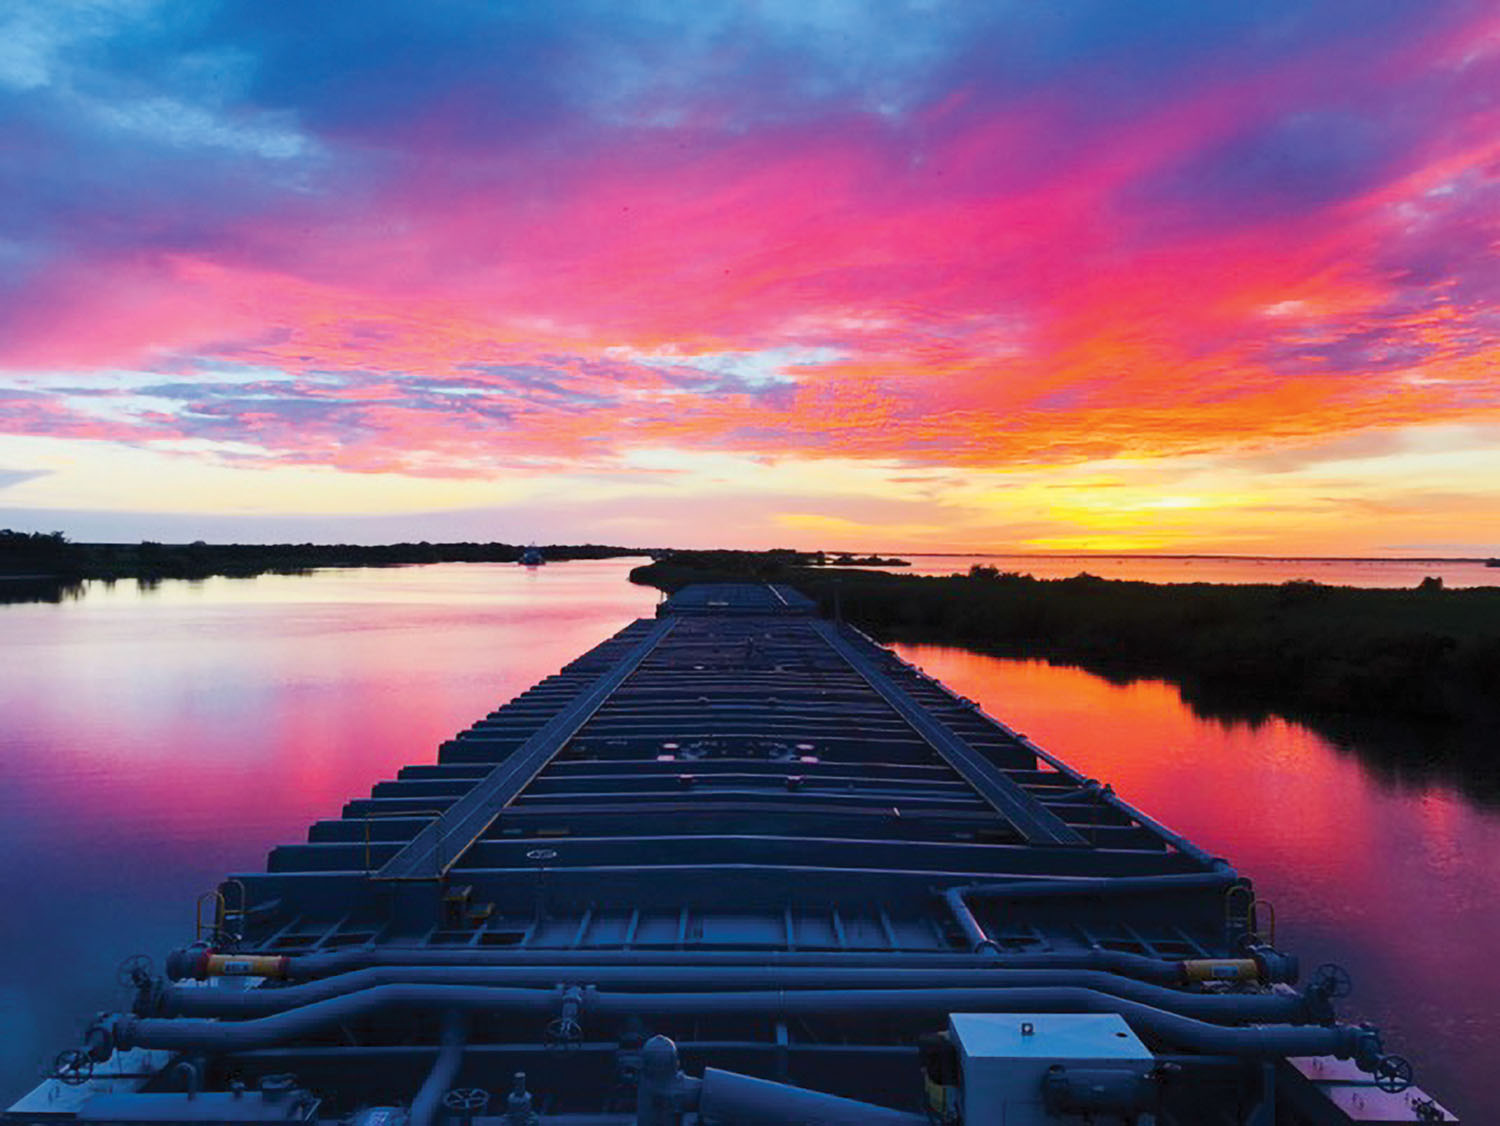 "Looking toward the Texas sky at sunset while waiting at Calcasieu Lock," by Capt. Dean Fitzgerald